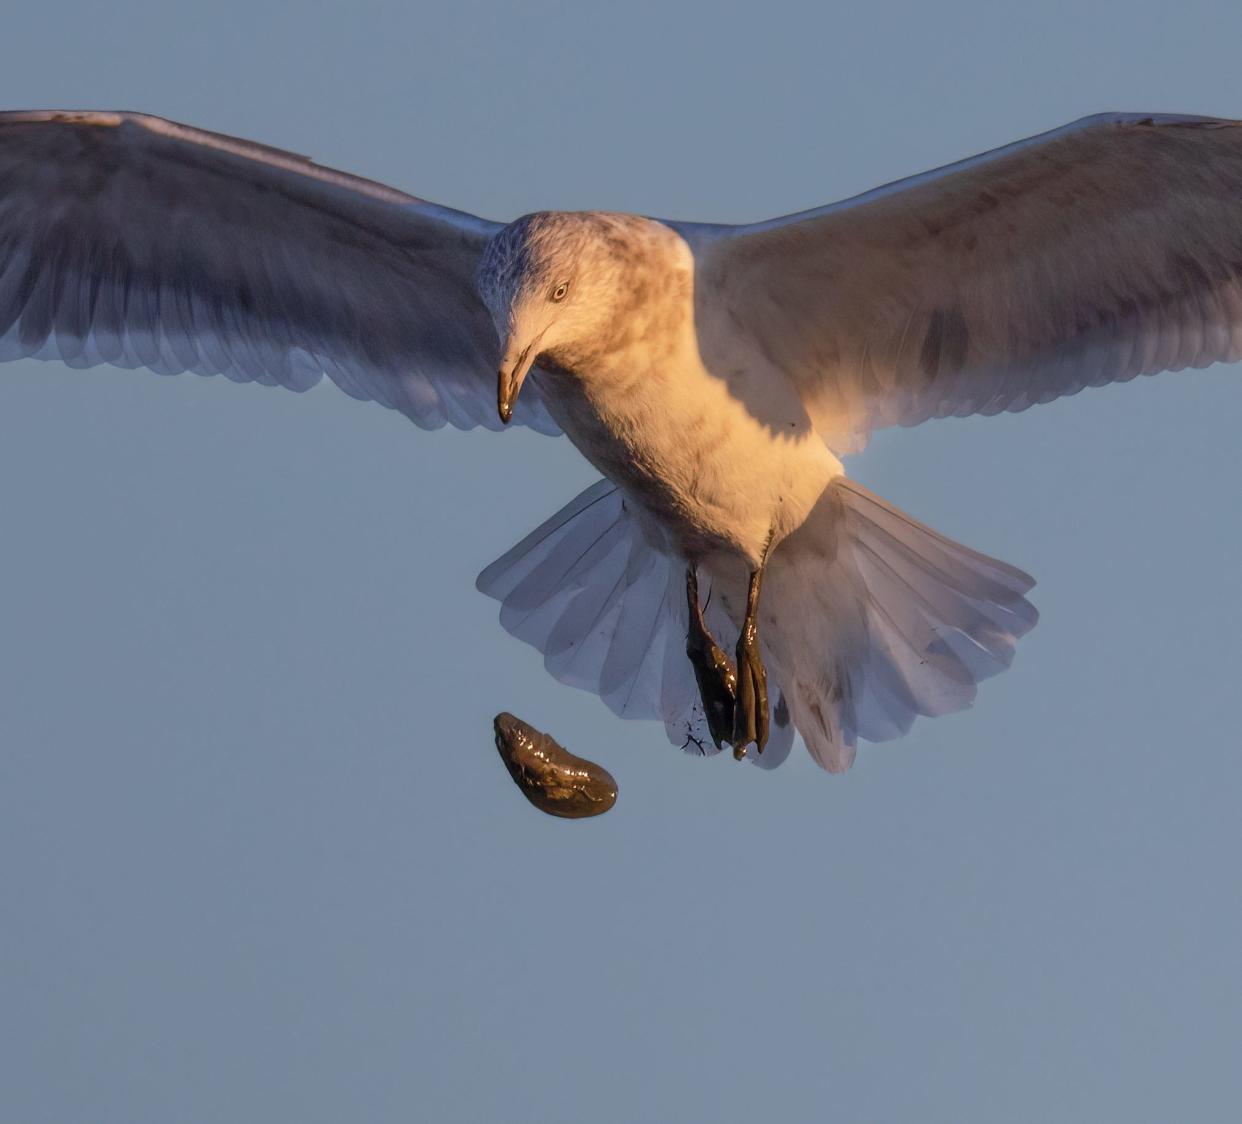 A herring gull drops a blue mussel onto the roadbed below.